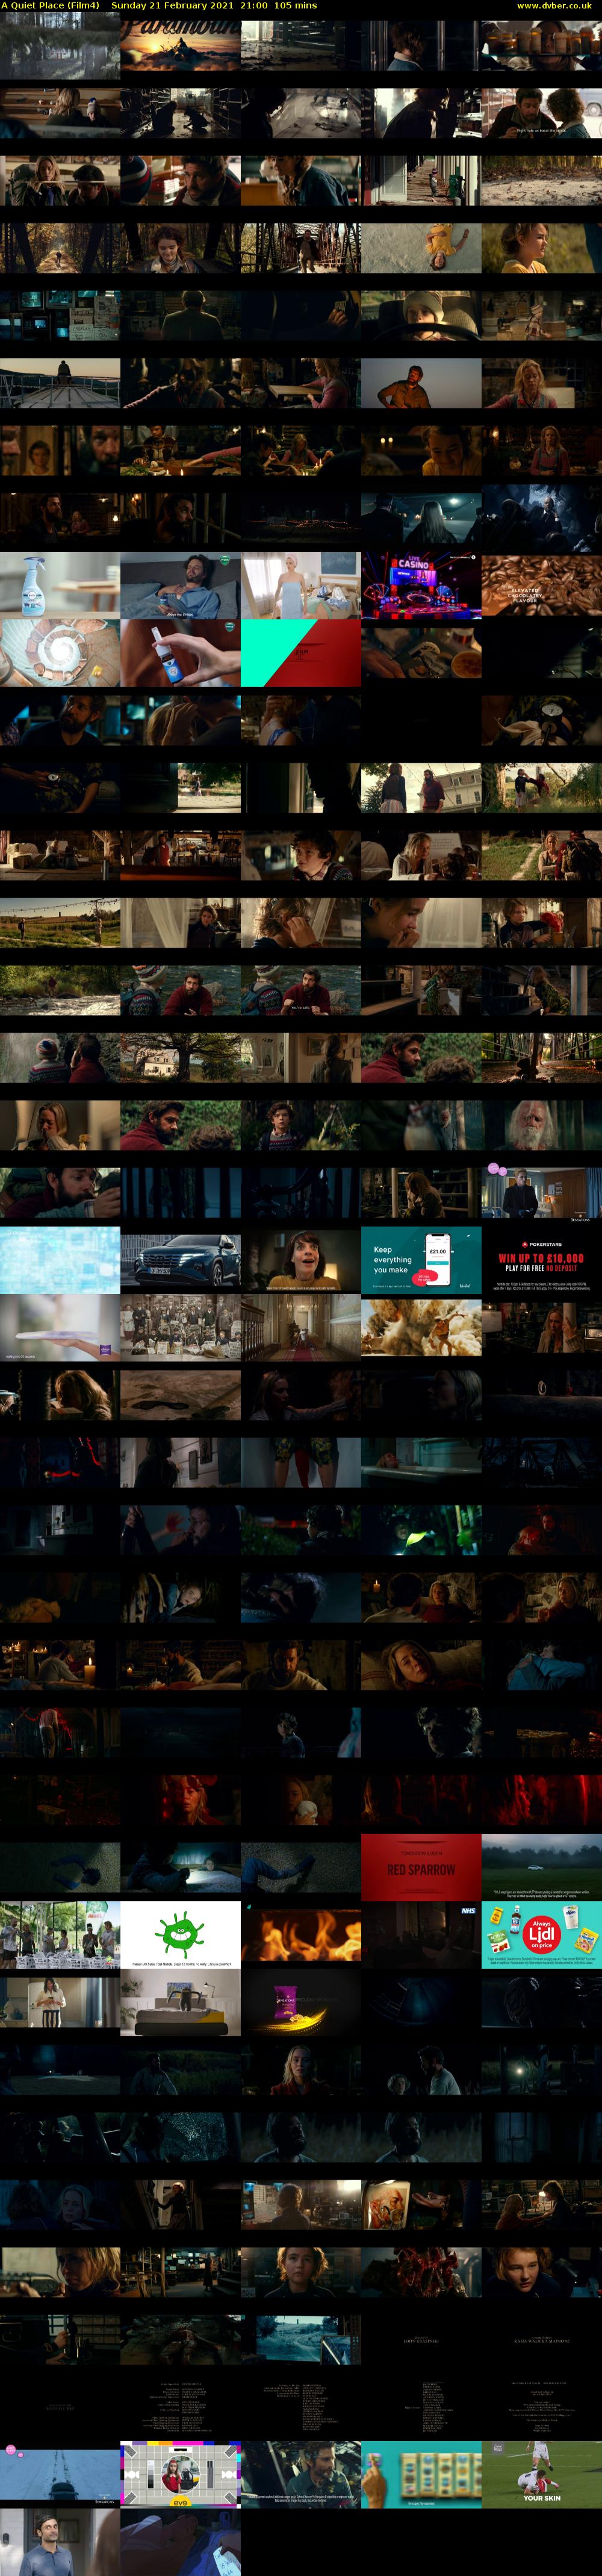 A Quiet Place (Film4) Sunday 21 February 2021 21:00 - 22:45